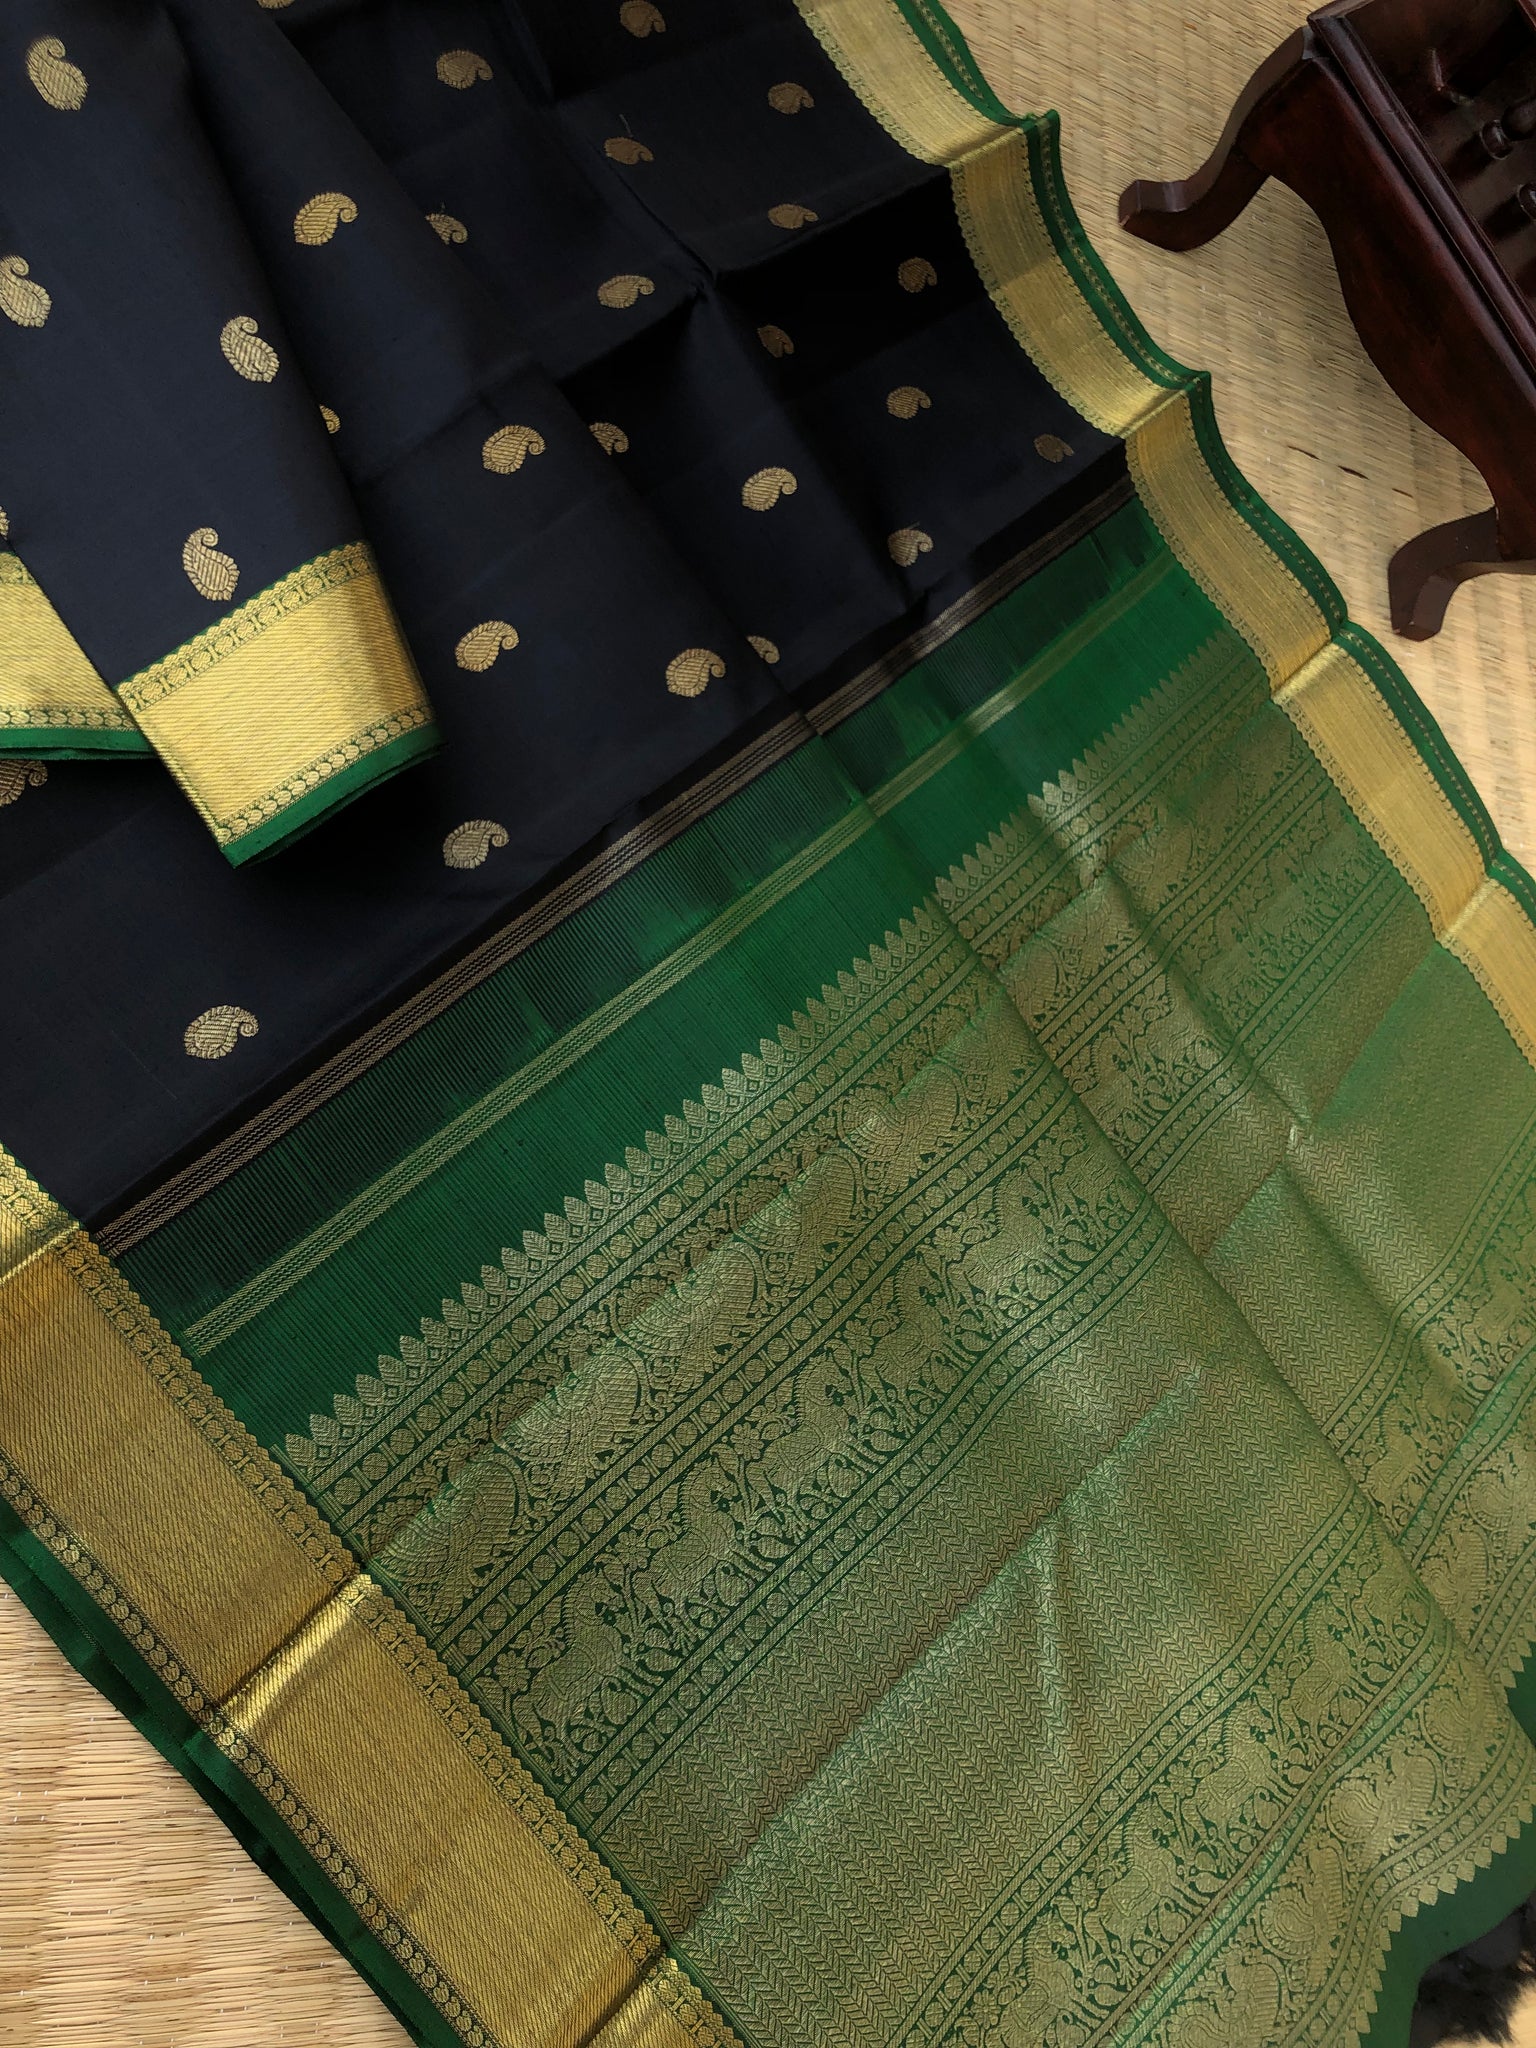 Solid Kanchivarams - stunning black and Meenakshi green solid gold Kanchivaram with paisley woven buttas is most beautiful